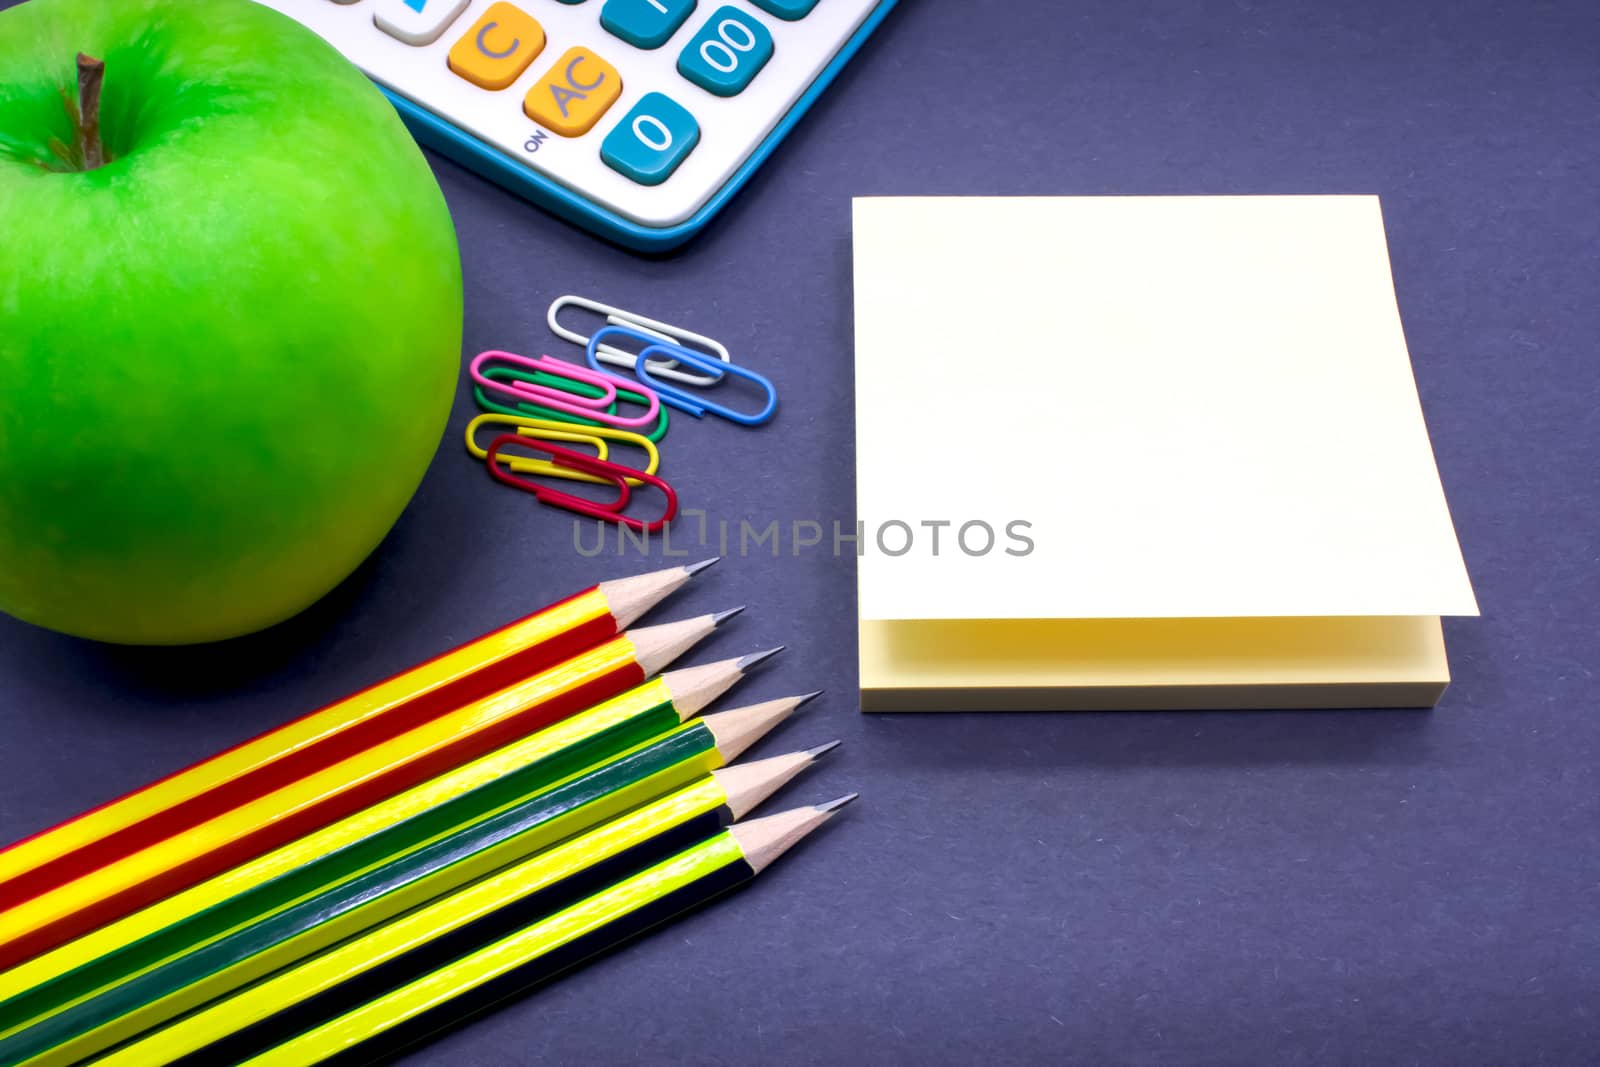 Assorted Stationary with a Green Apple on the Desk